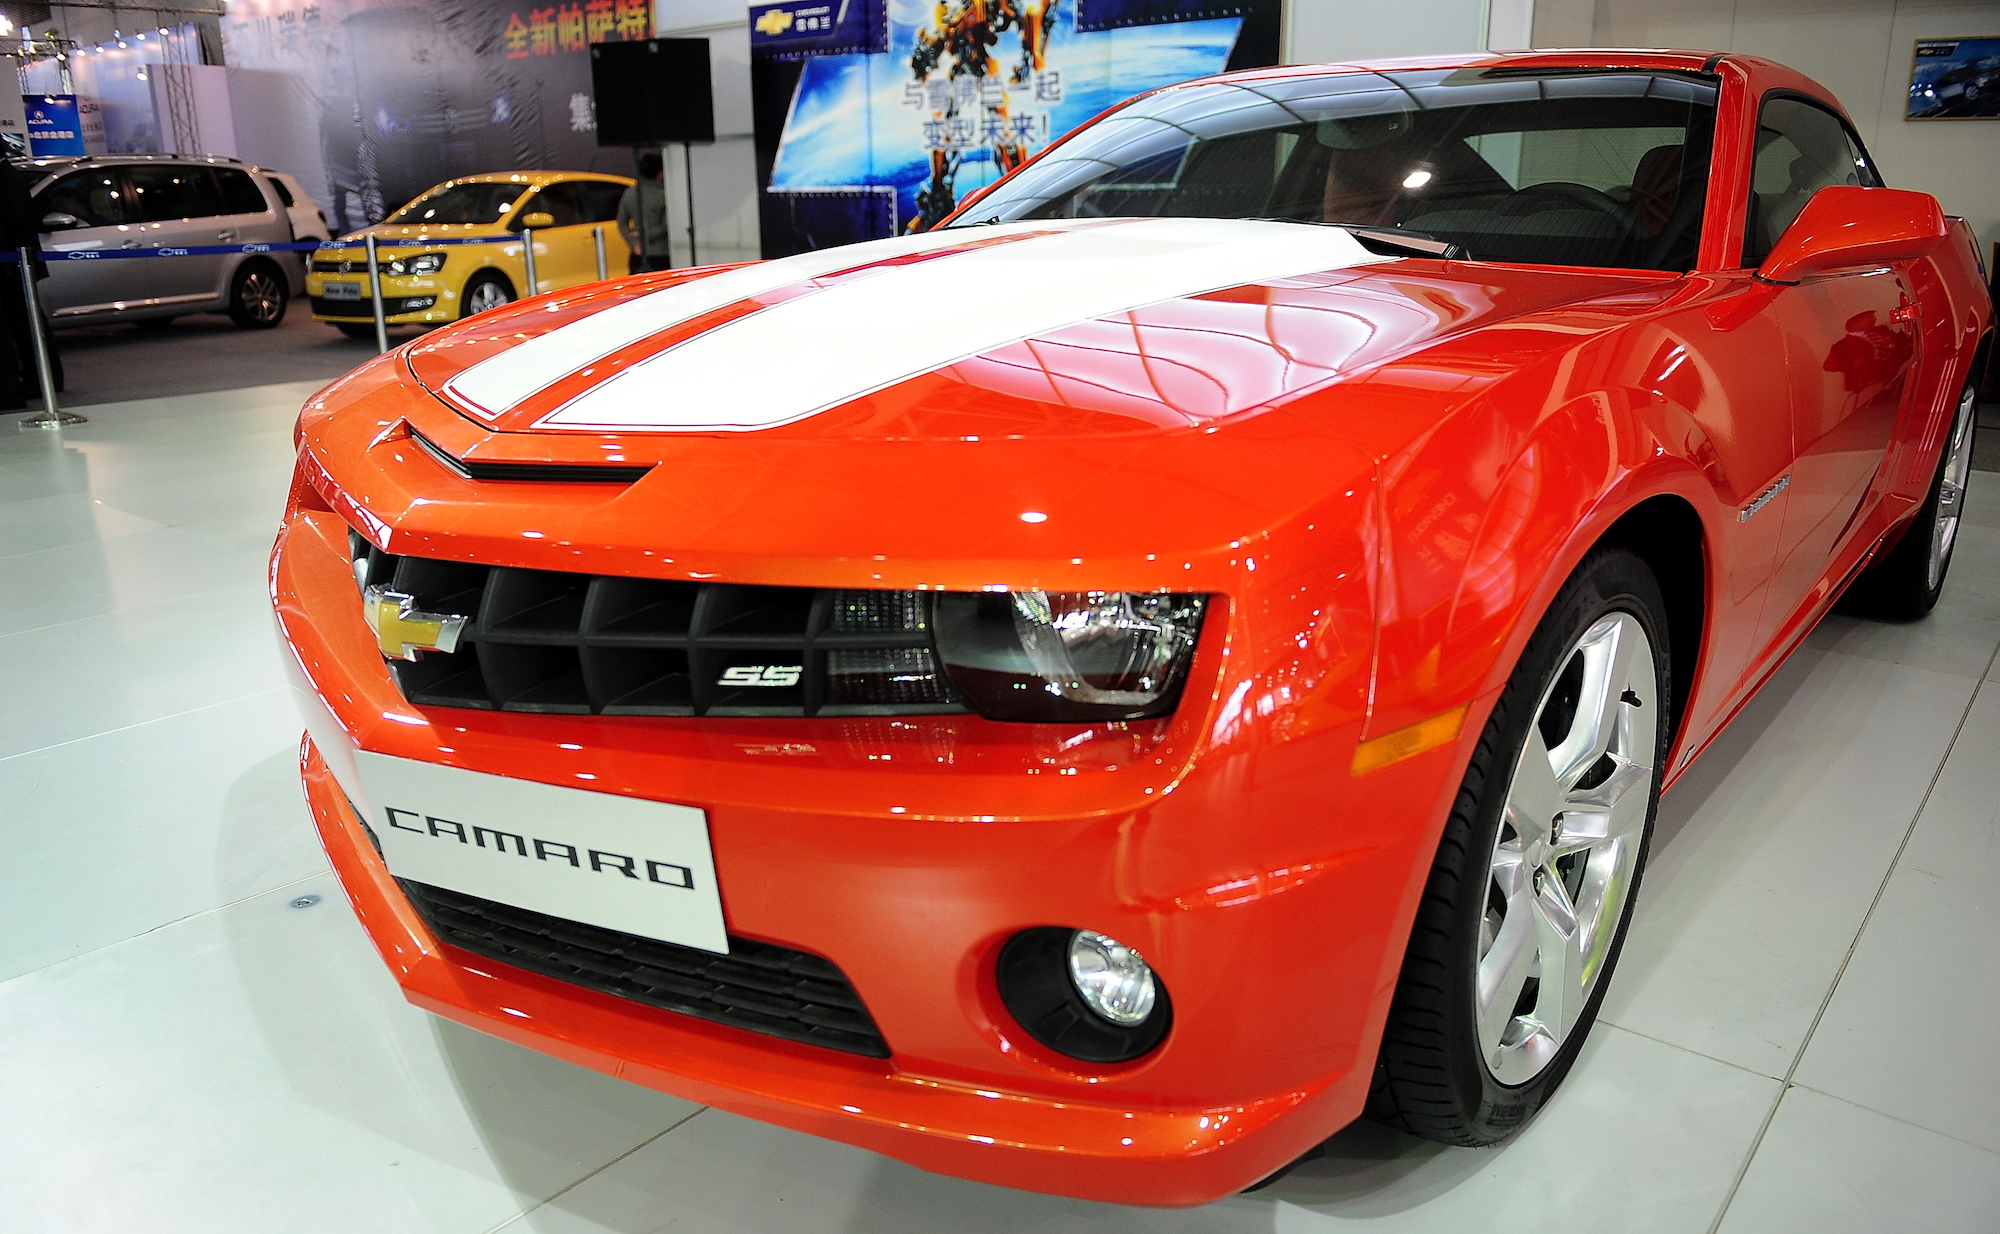 A Chevrolet Camaro, rival to the Ford Mustang, is on display during 15th Beijing Automobile Trade Show